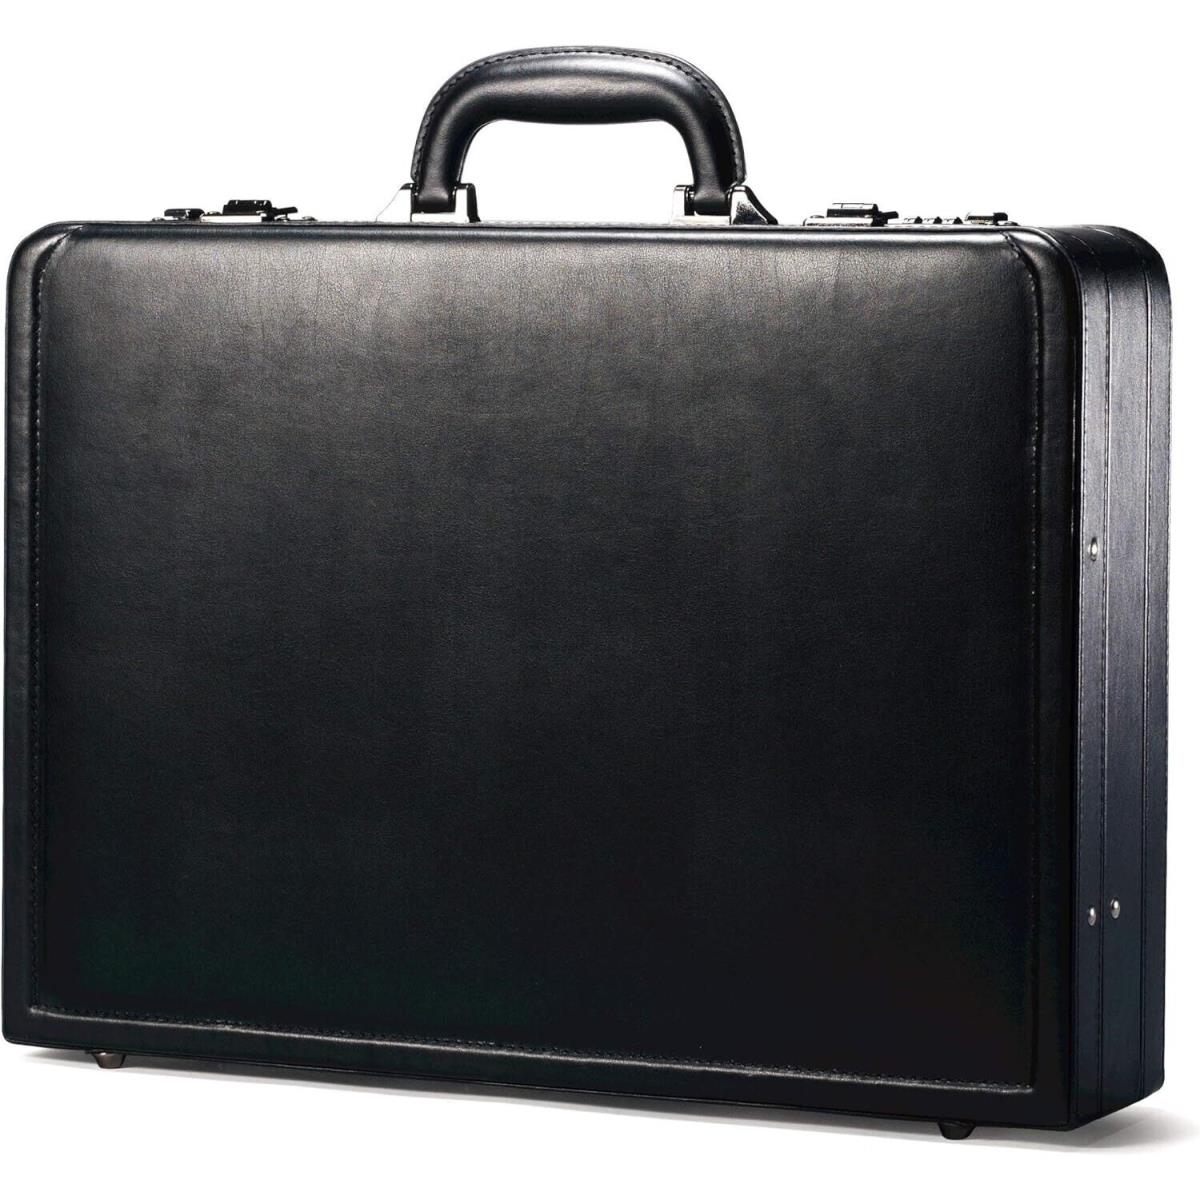 Samsonite Bonded Leather Attache Carrying Case Black Fits 15.6 Laptop Business